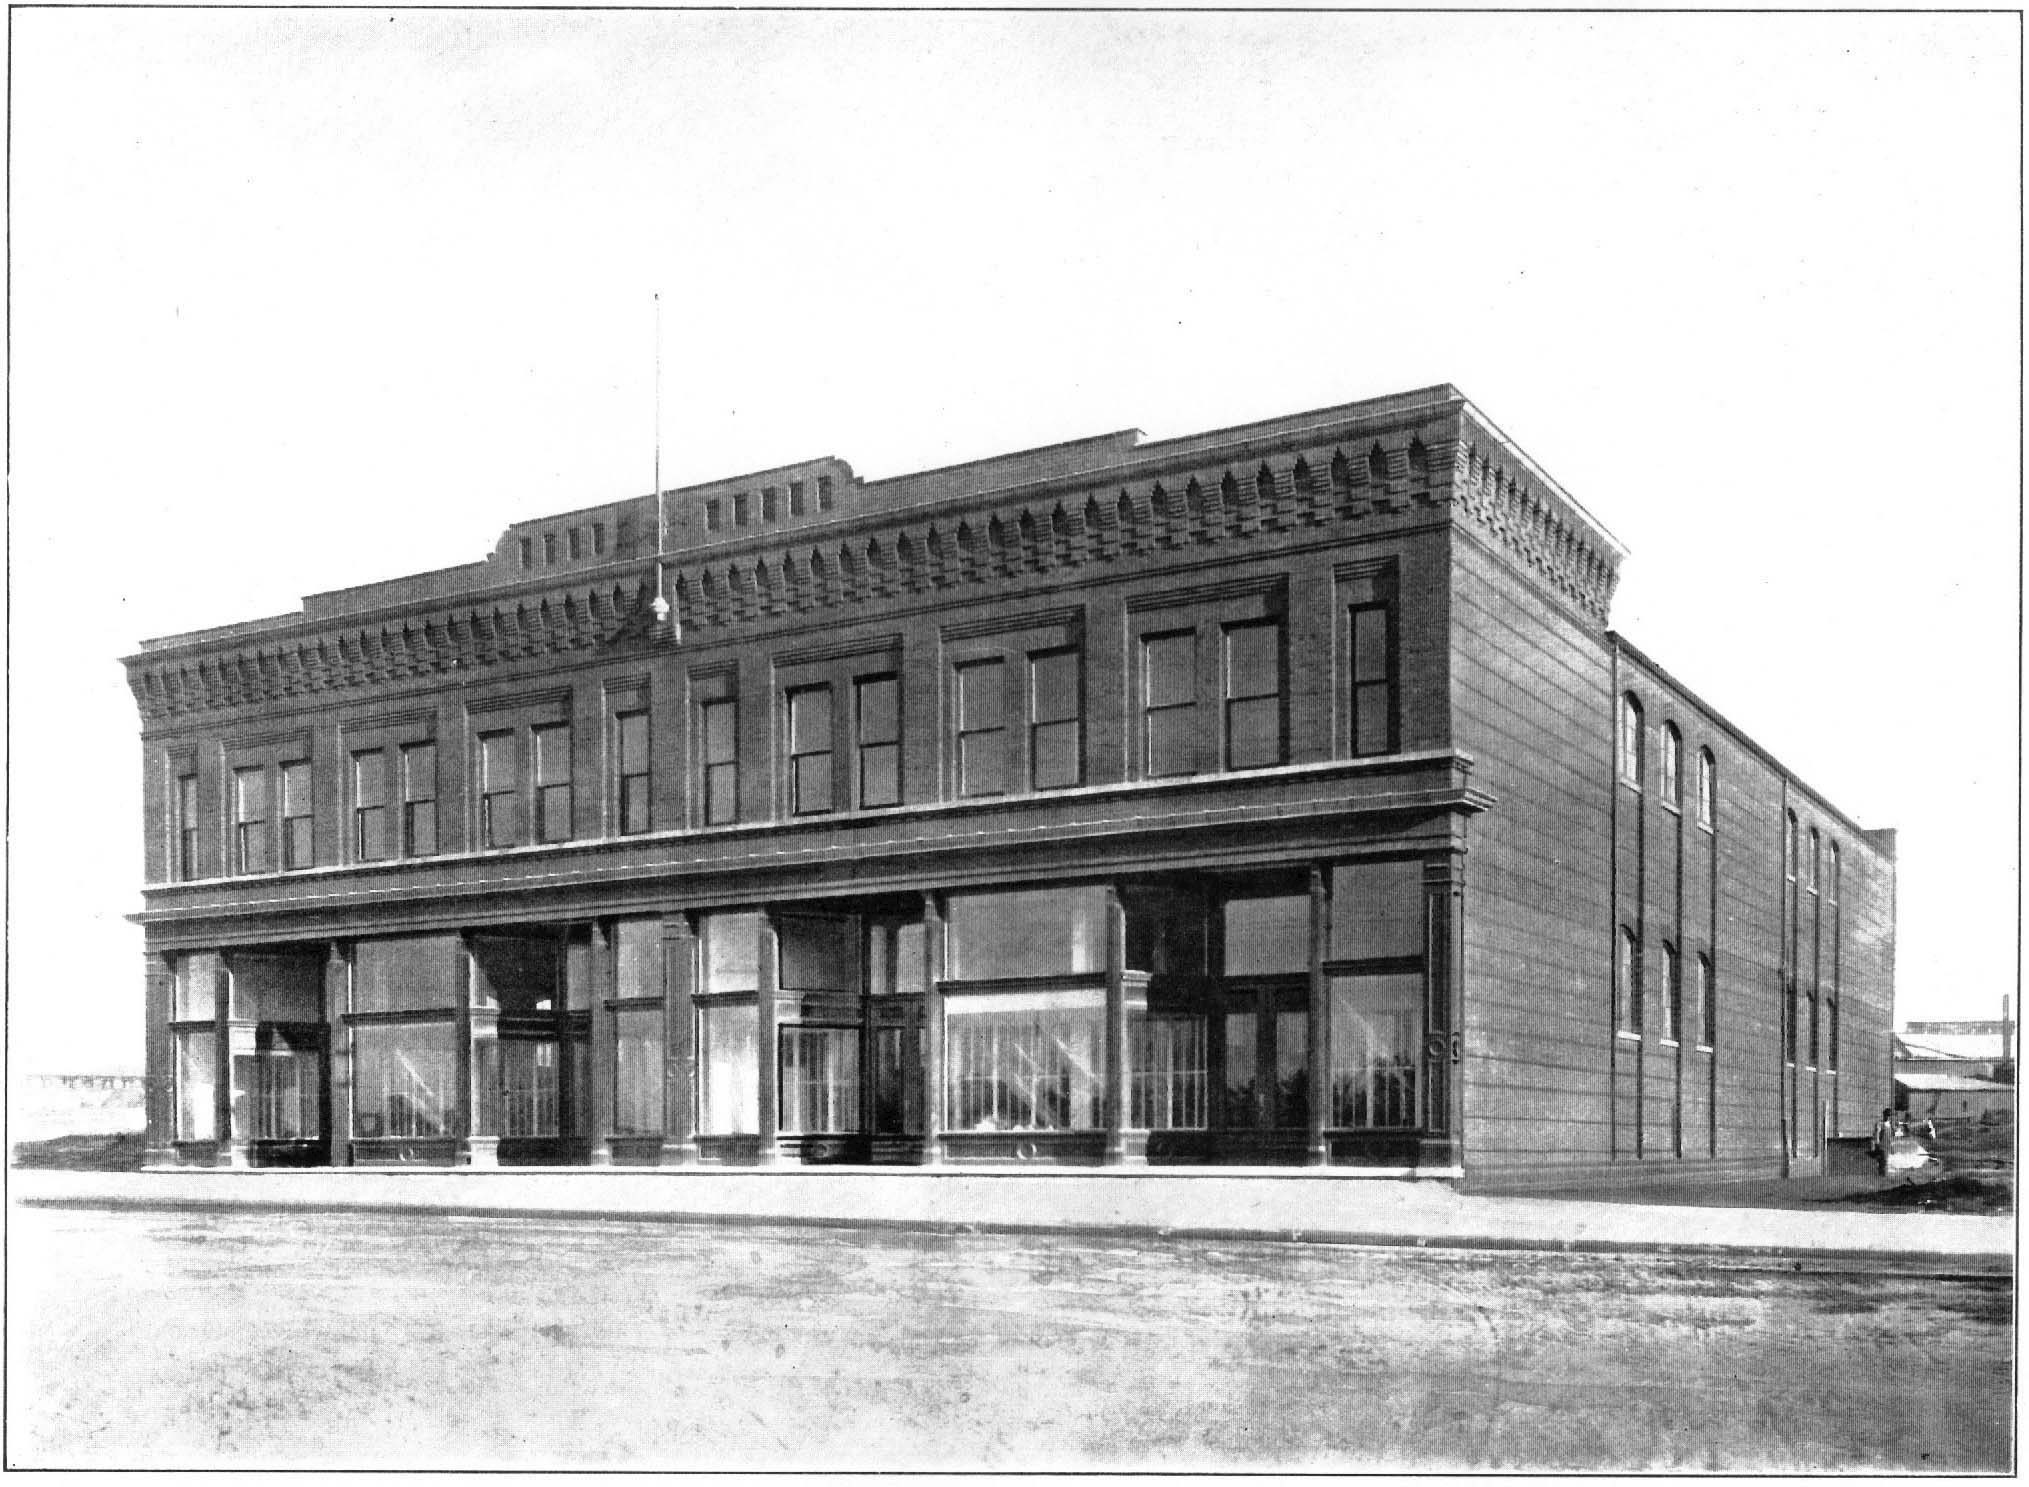 An undated photo of 701 Whaley, erected in 1903.